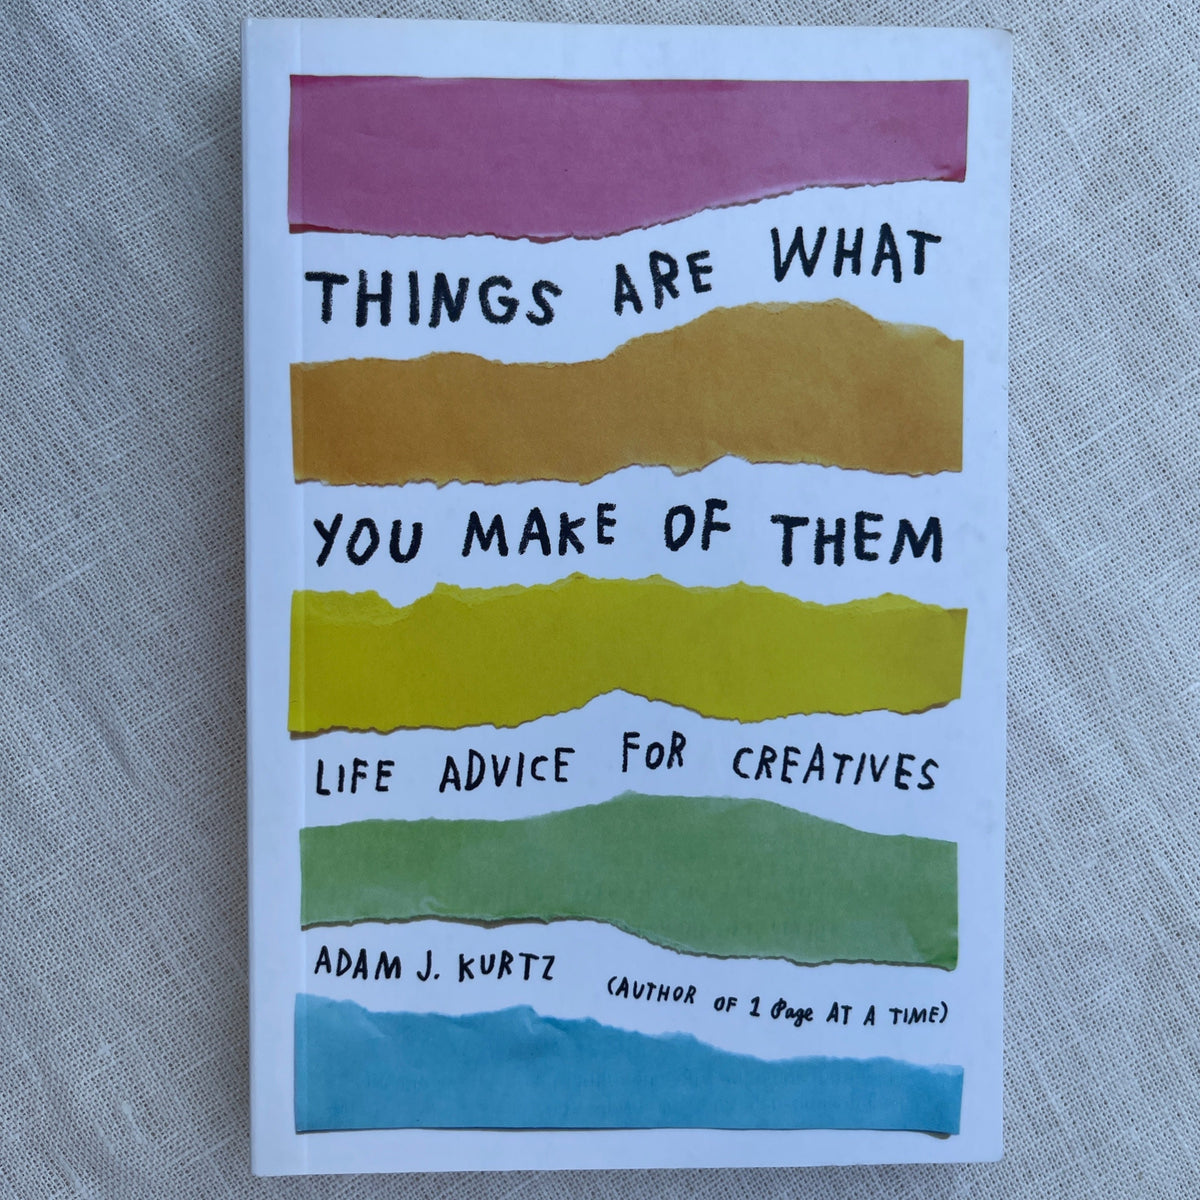 Things Are What You Make Them: Life Advice for Creatives